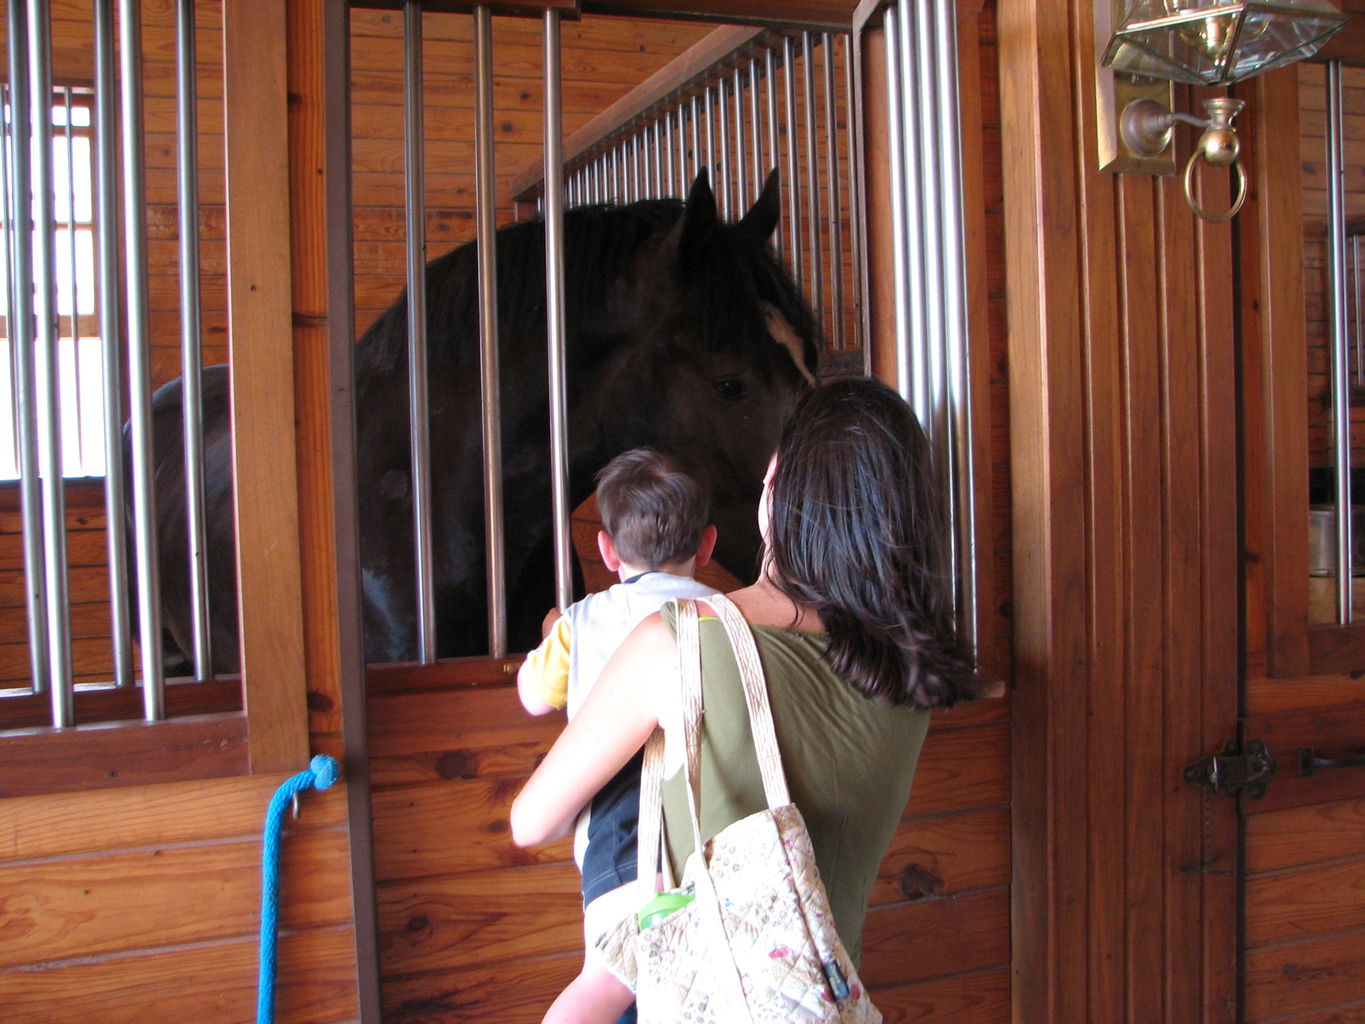 Visit to the Clydesdales
